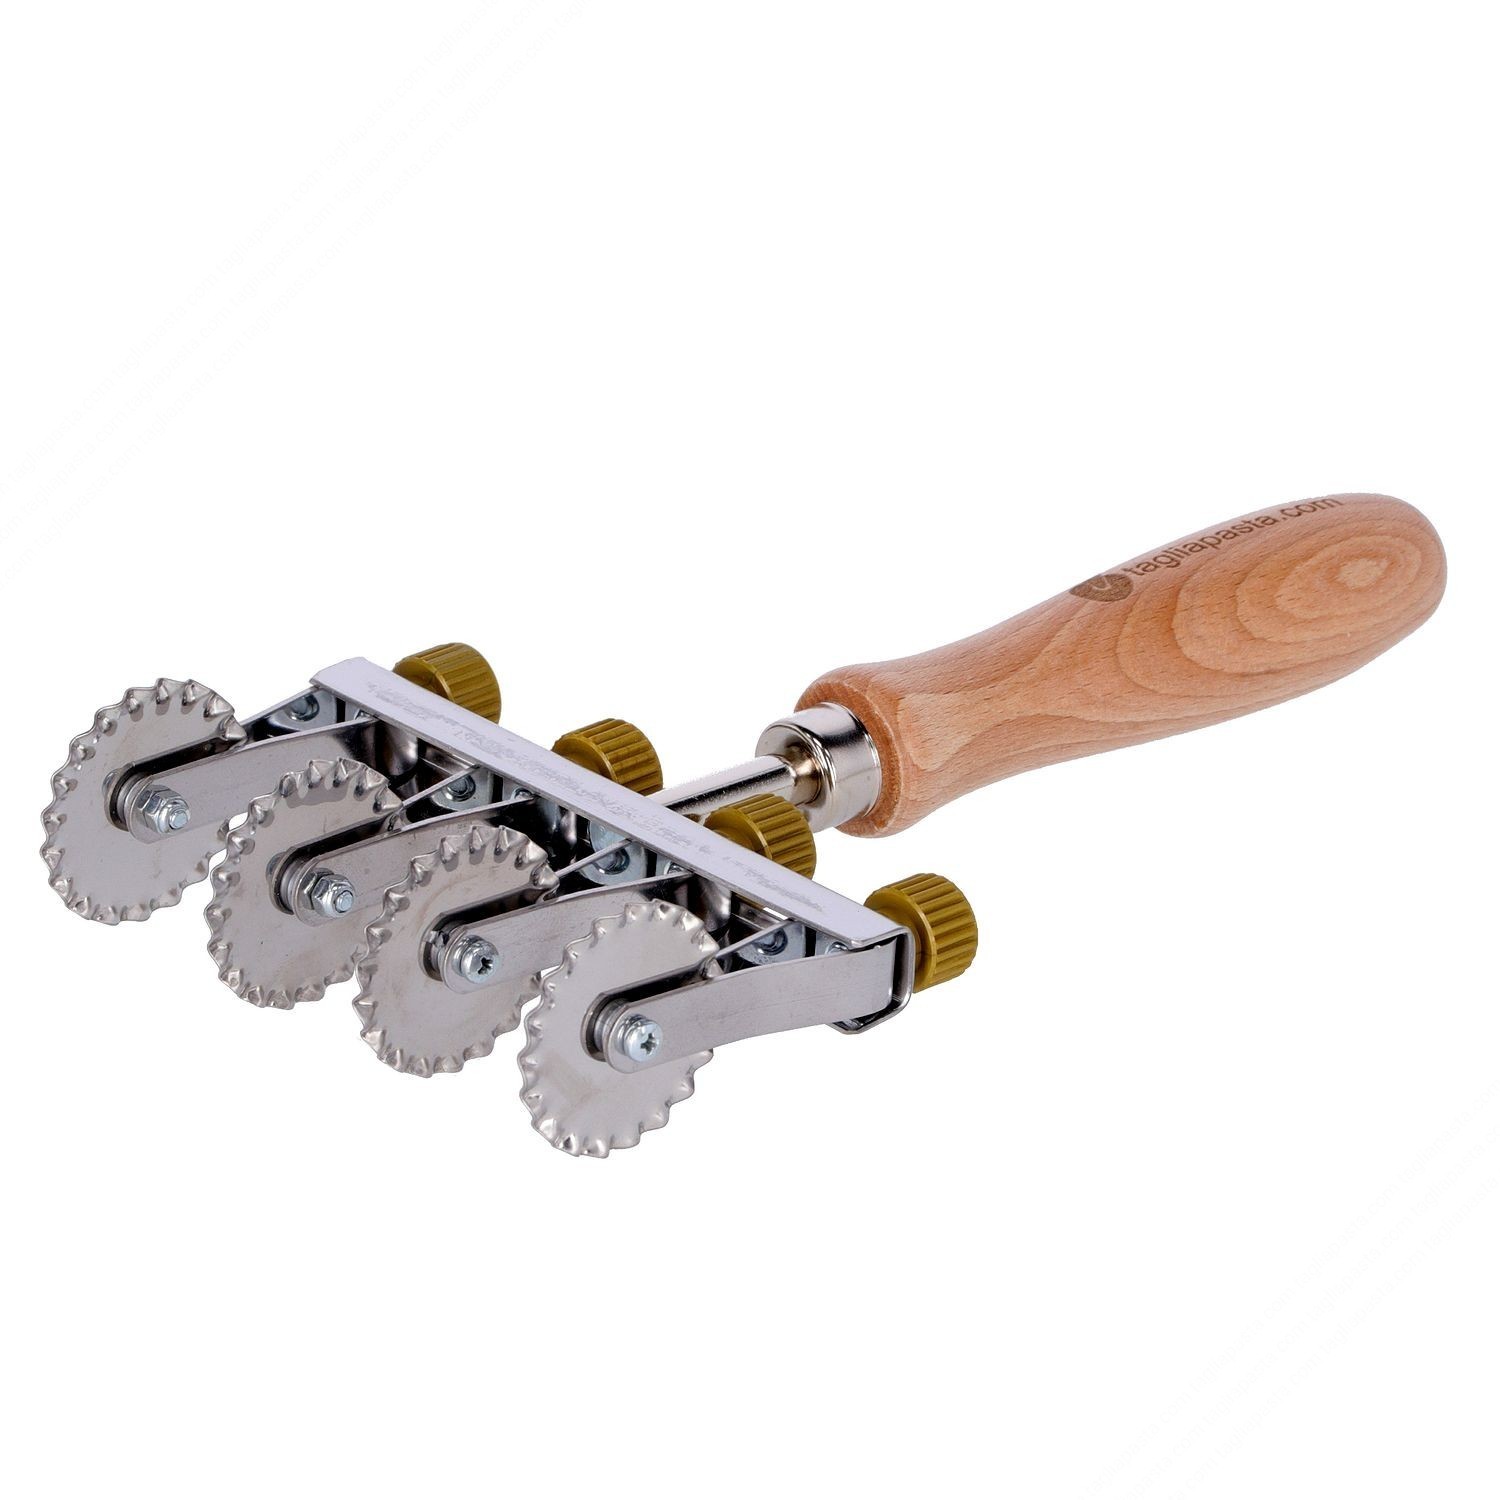 Adjustable pasta cutter with 4 stainless steel toothed wheels